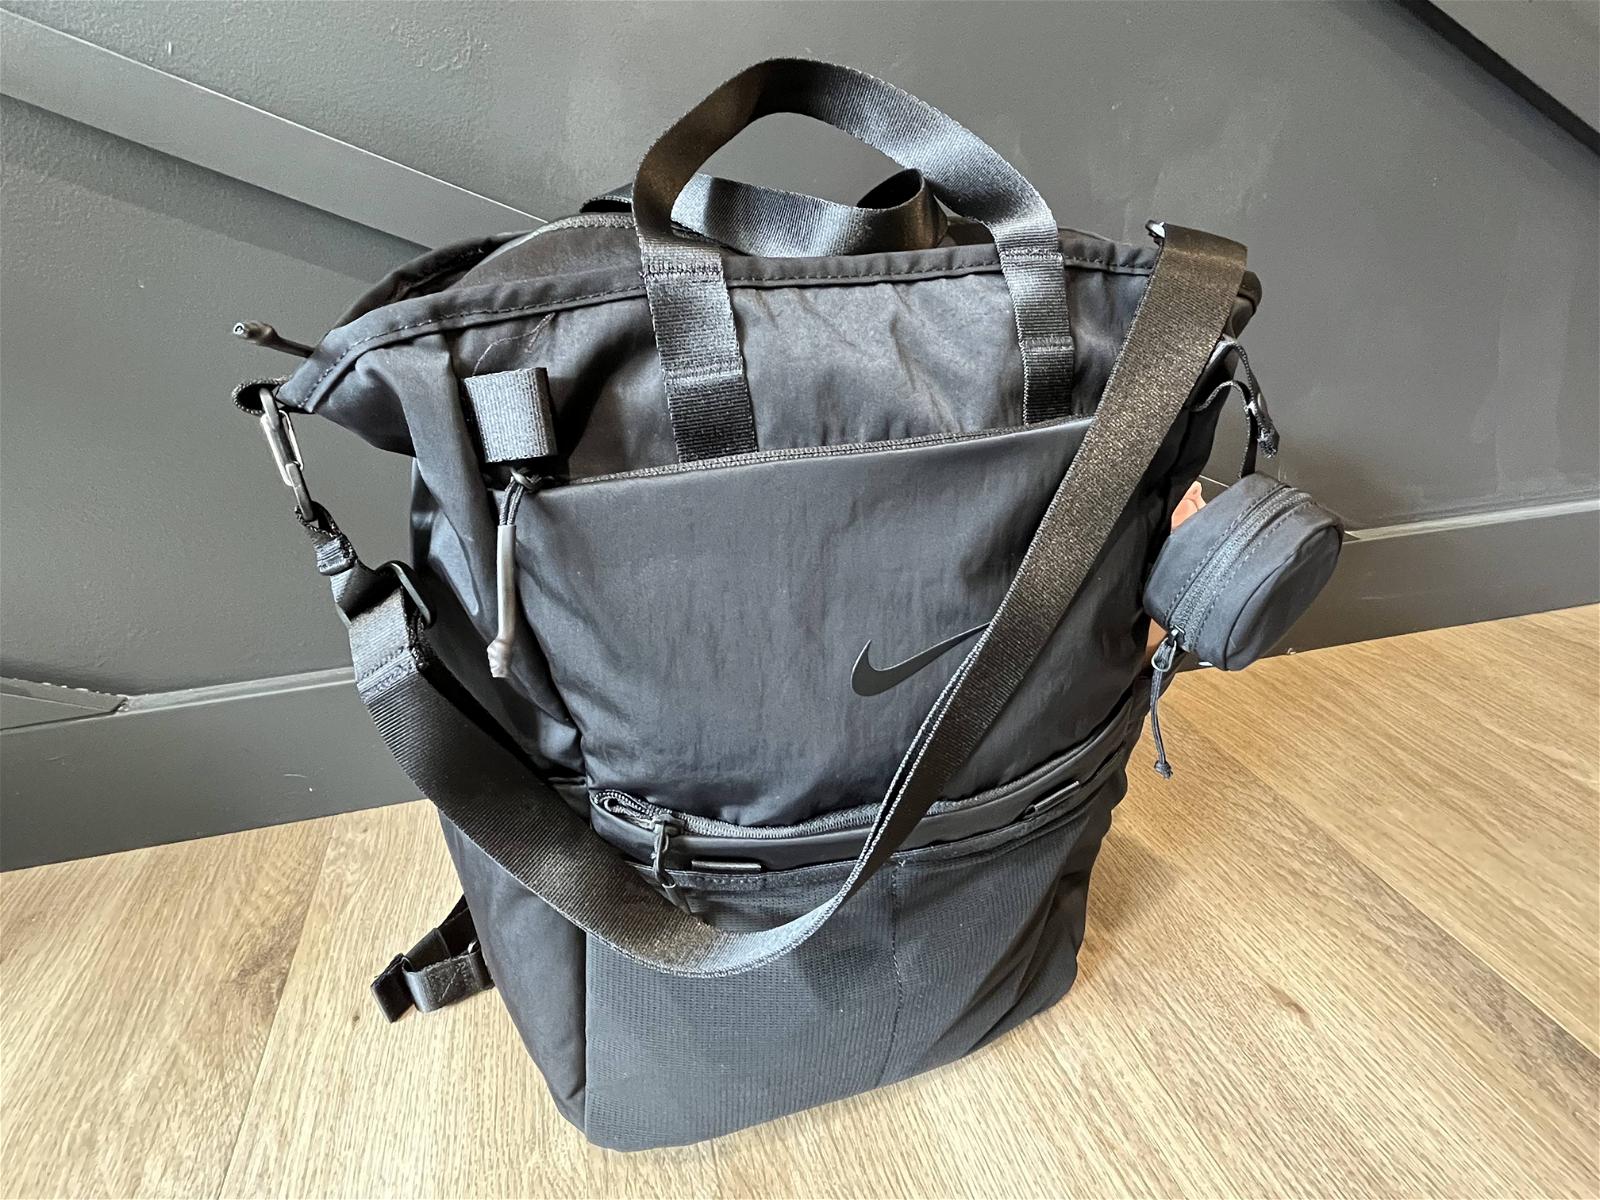 Nike Convertible Diaper Bag Review: Unisex and Travel-Friendly